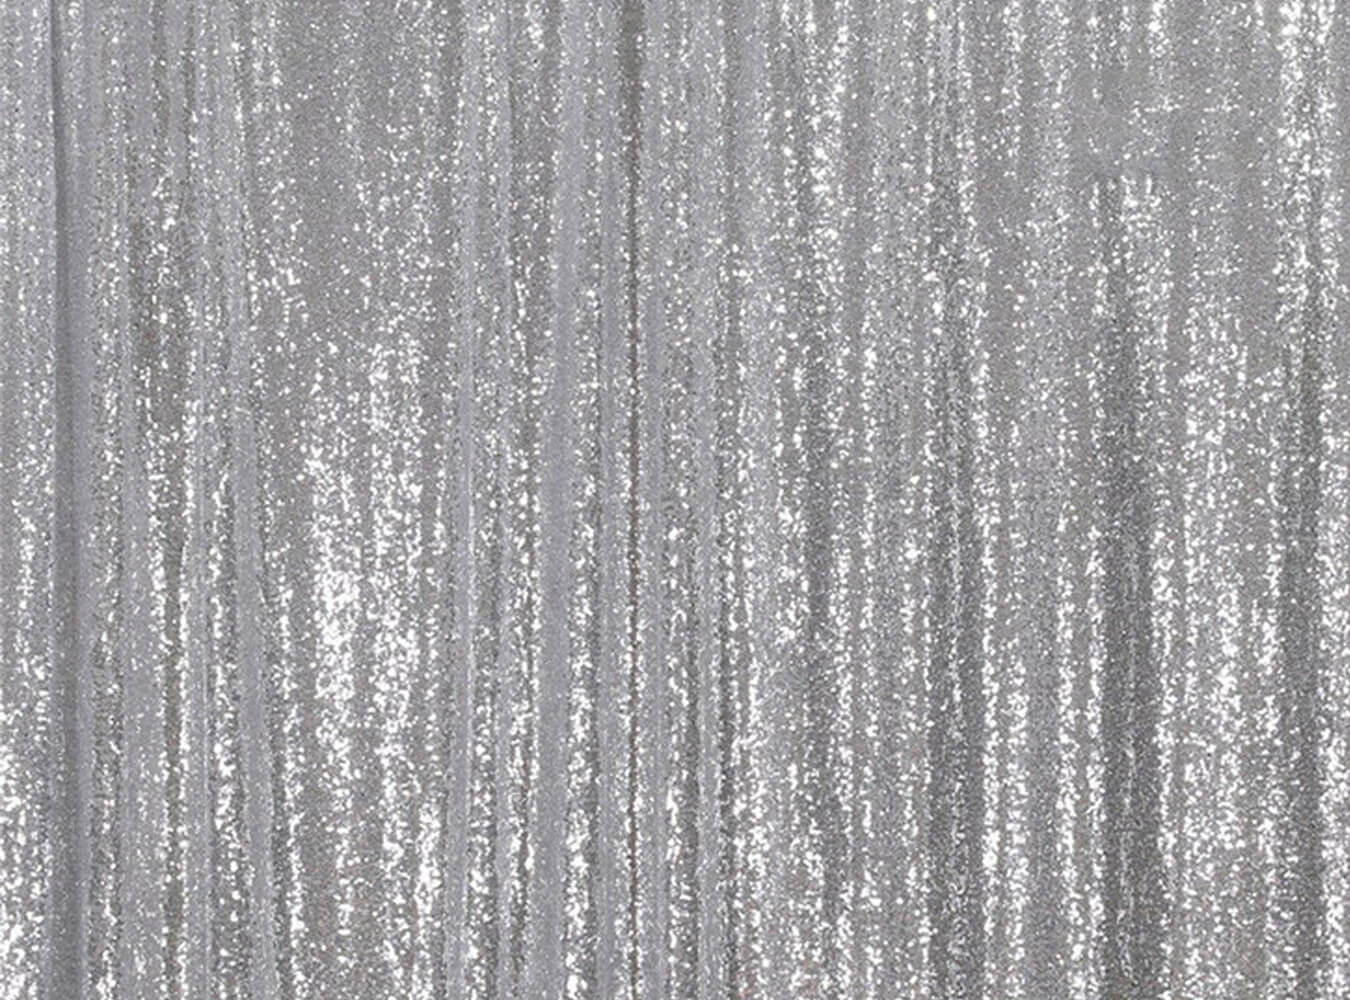 Backdrops Prop Sequin Fabric Mermaid Sequin Fabric Stretchy Sequin